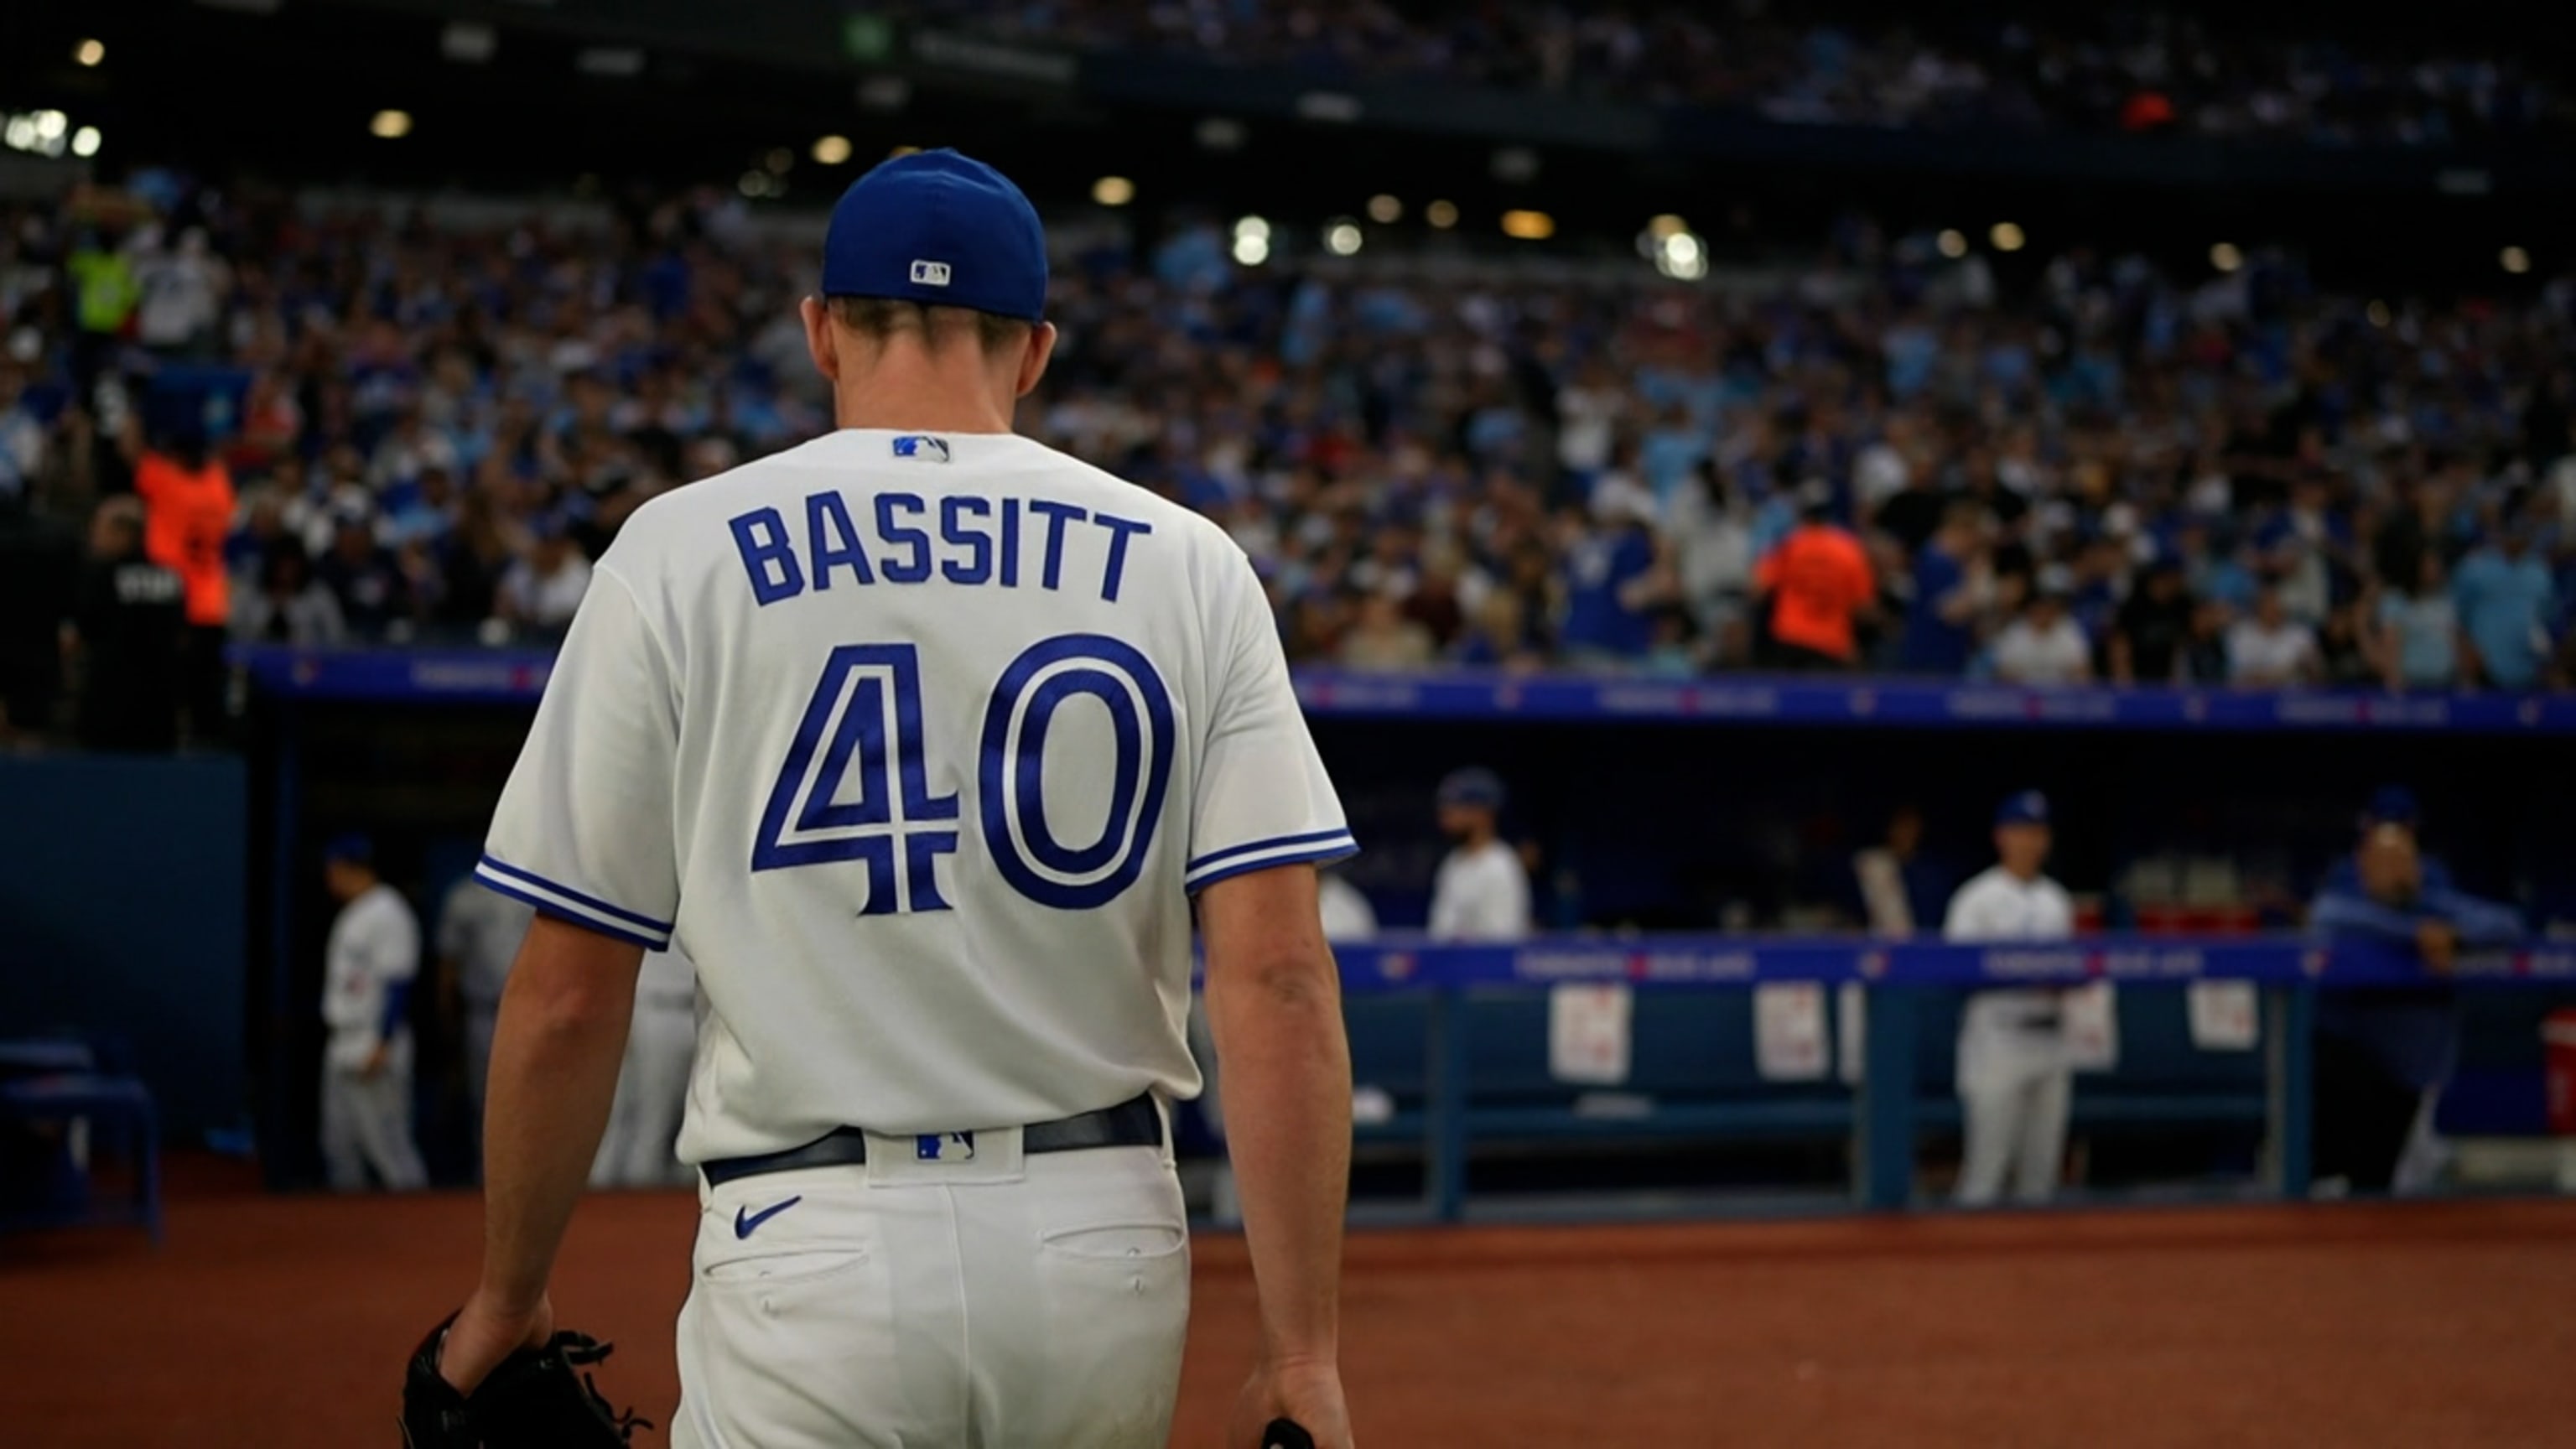 Oh baby: Winning weekend completed for Blue Jays Chris Bassitt